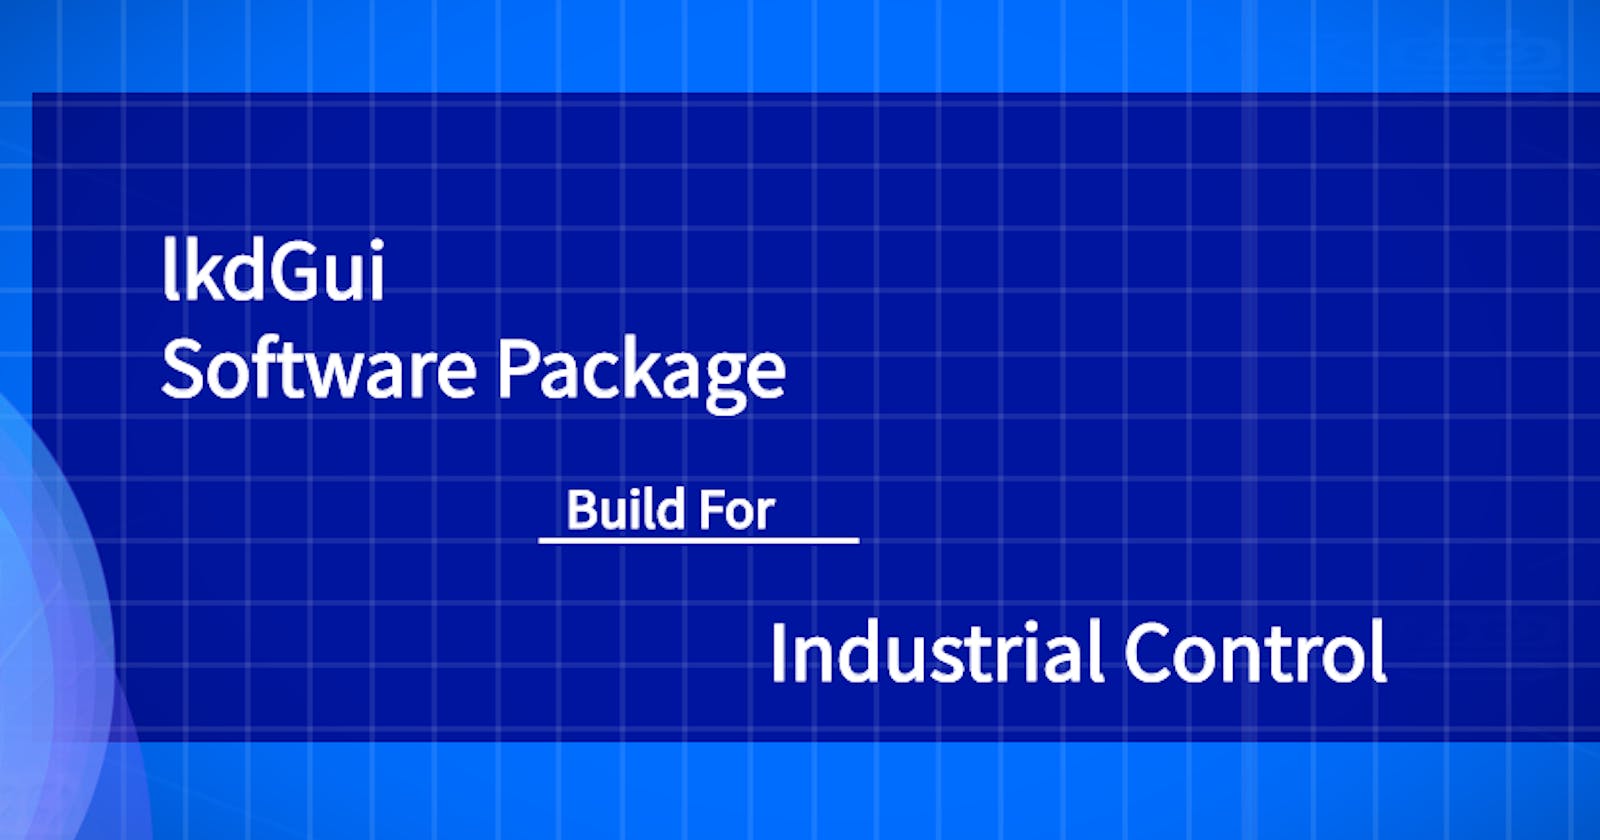 lkdGui Software Package: Build for industrial control.